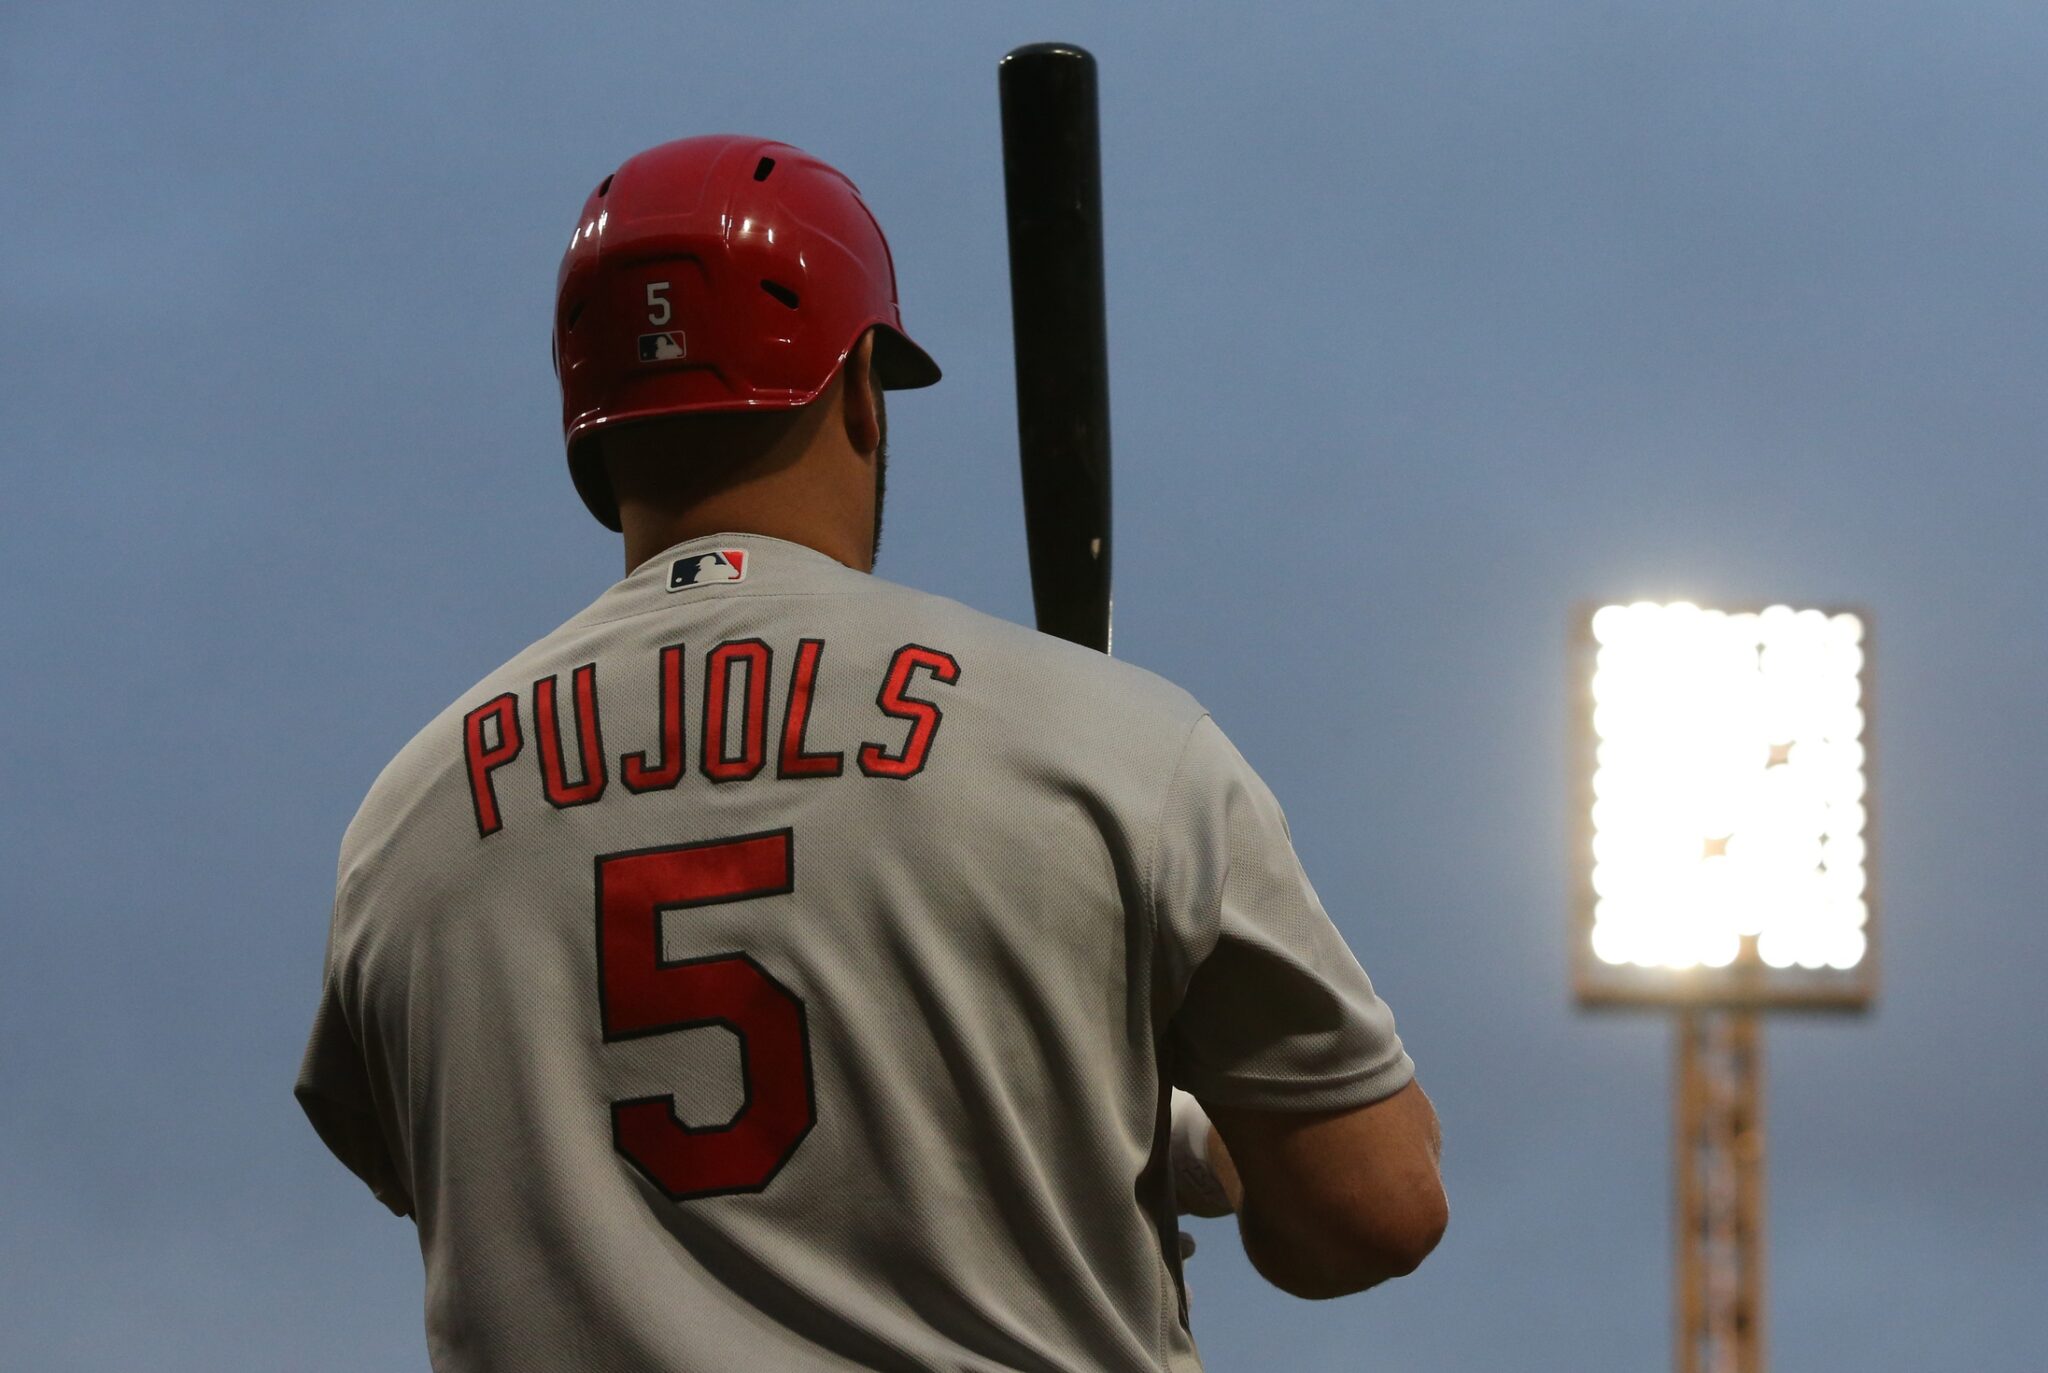 Pujols named to NL All Star team as 'legacy selection